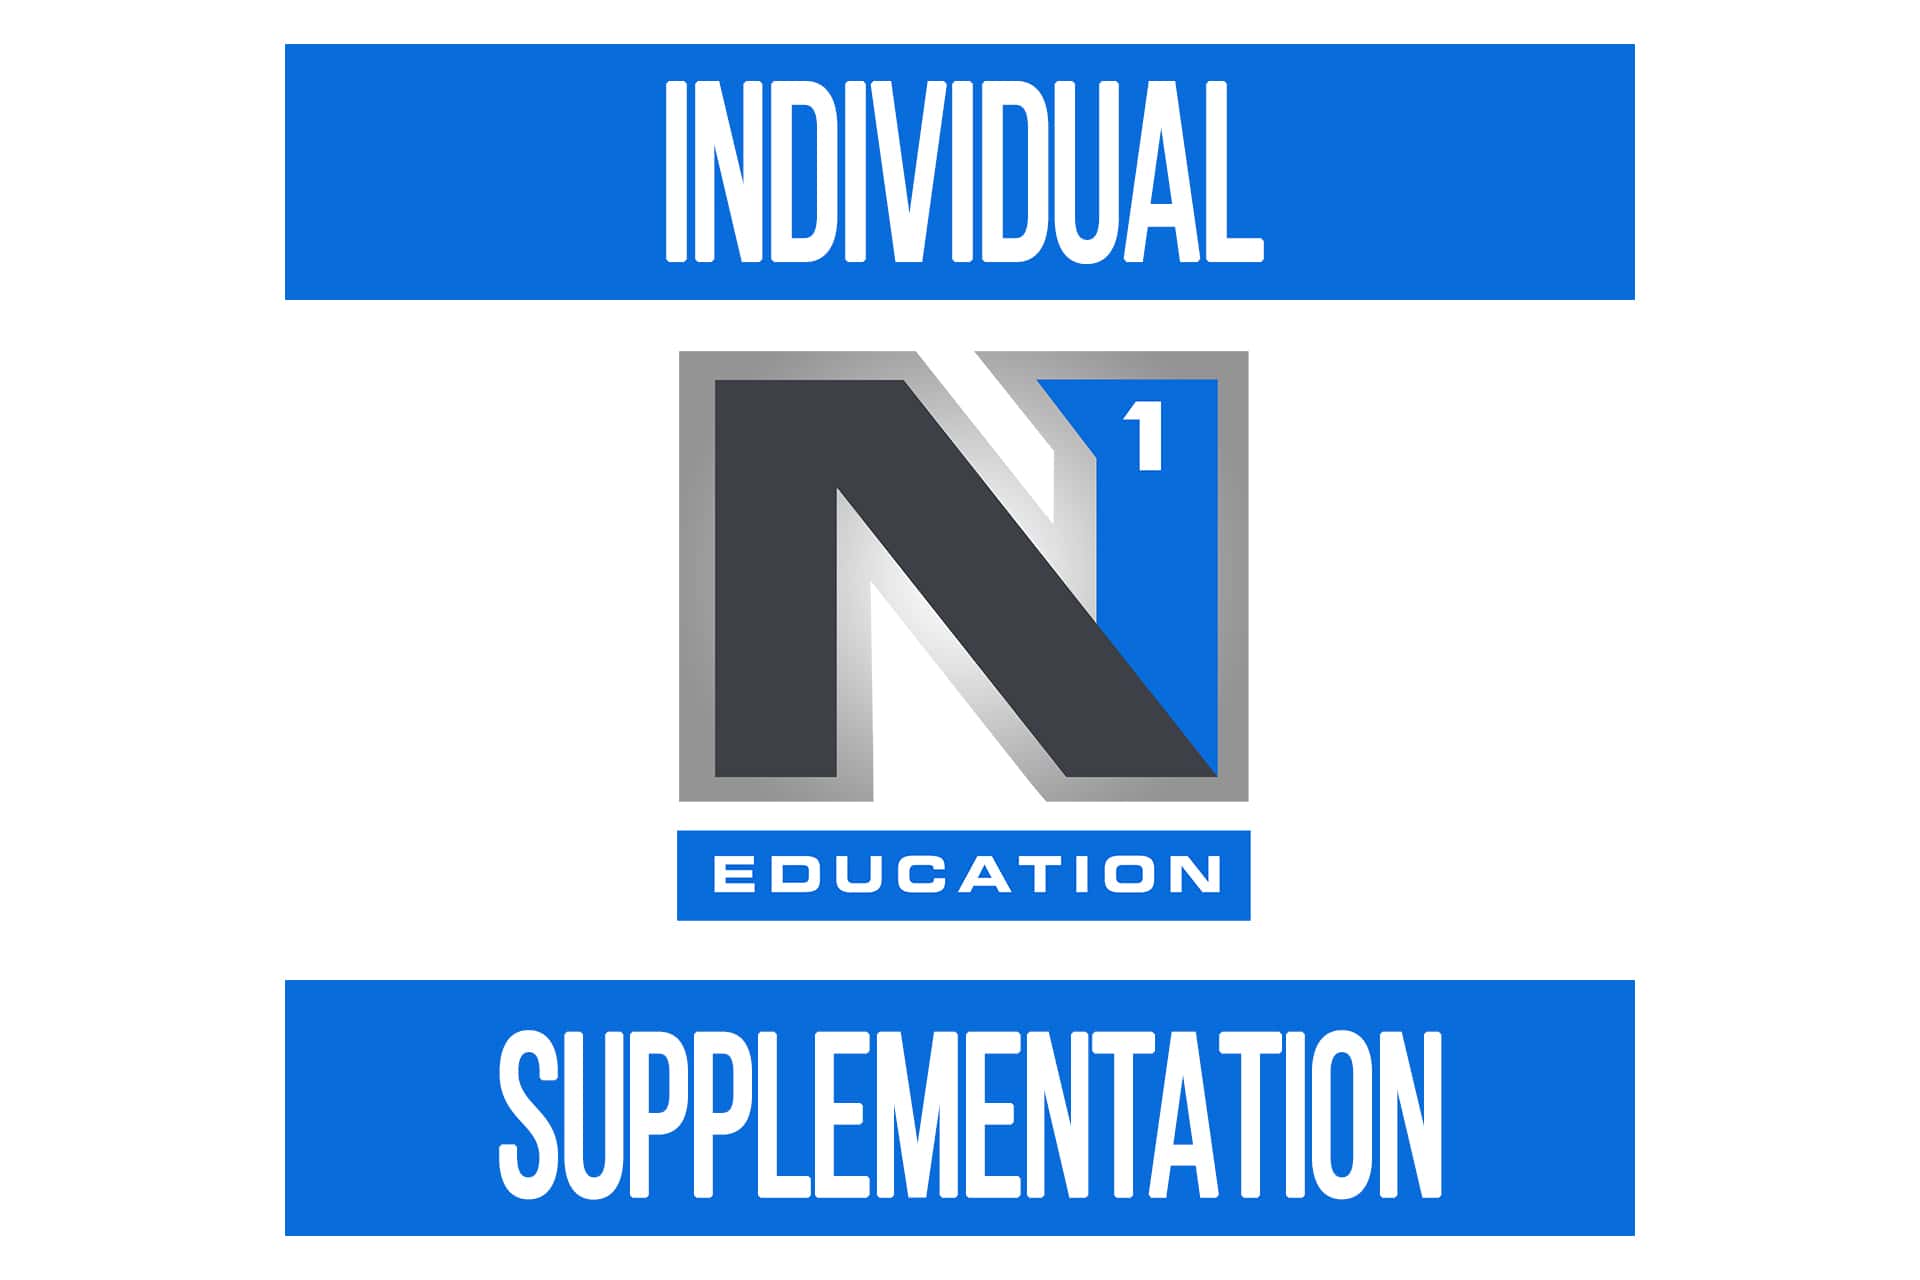 Supplementation is Individual Not Based on Demographic